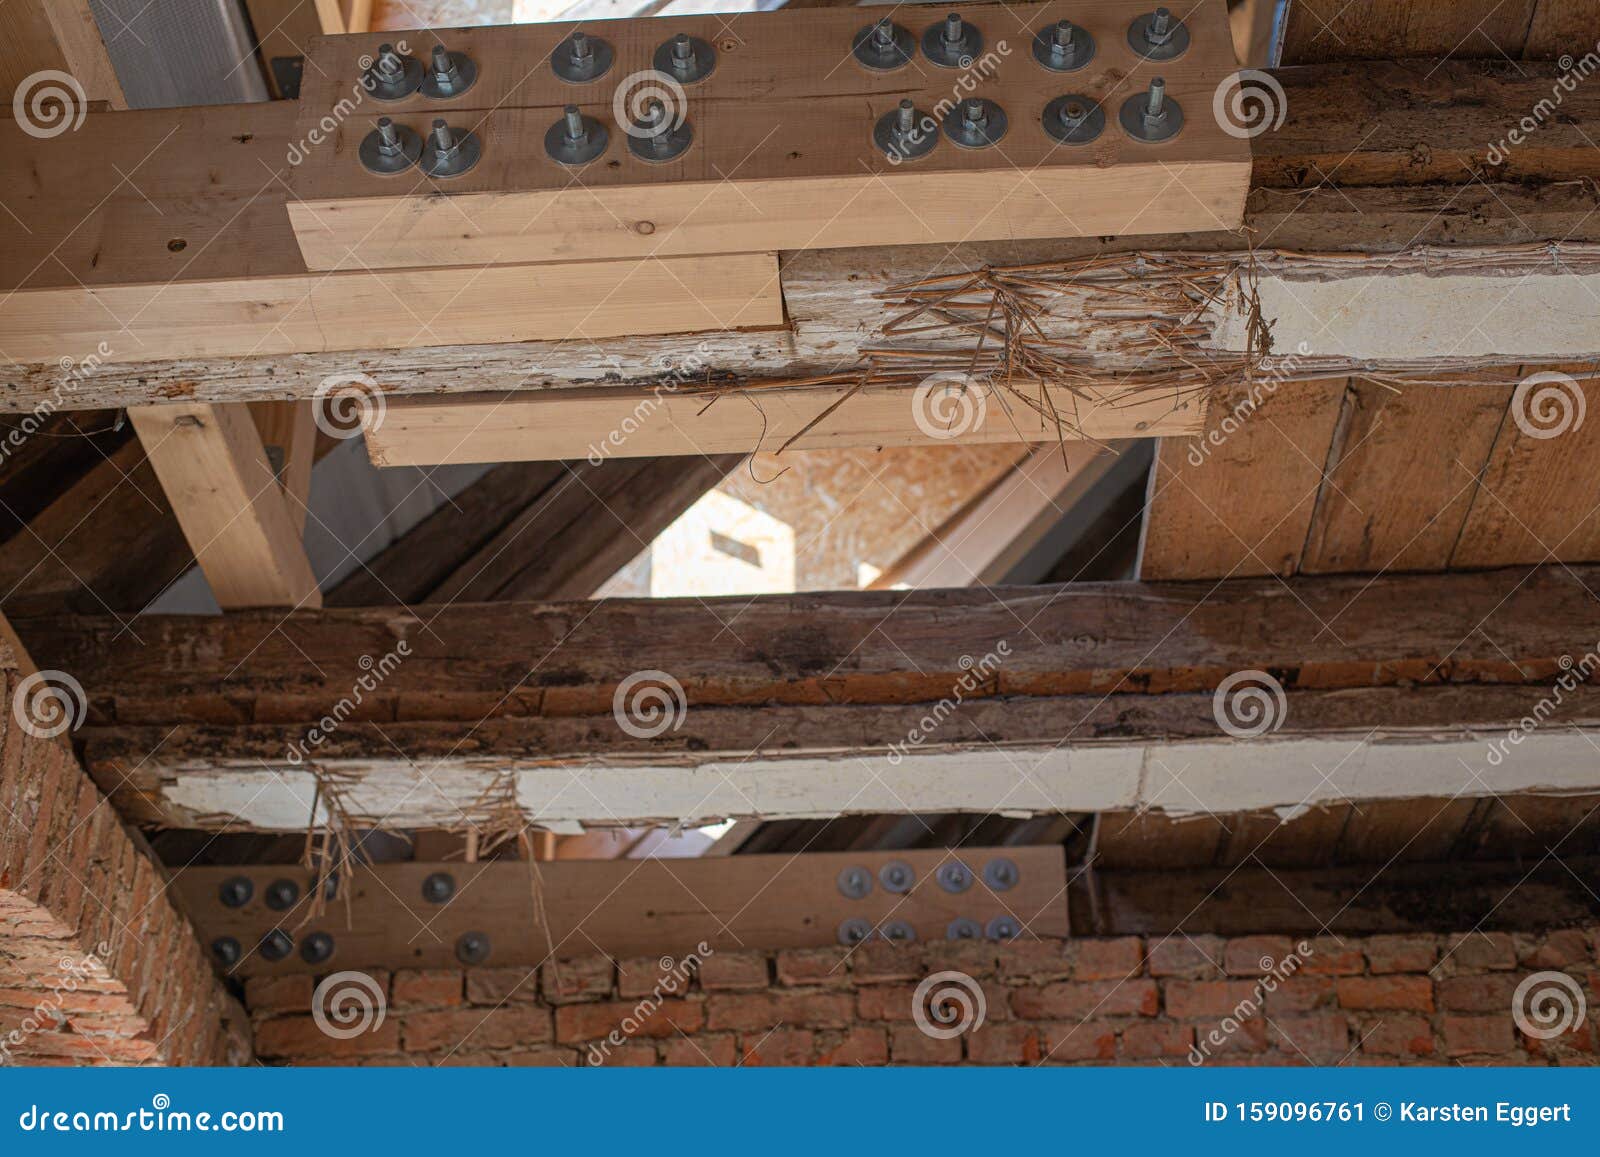 laborious work an old house is restored, whereby old beams are strengthened with new ones